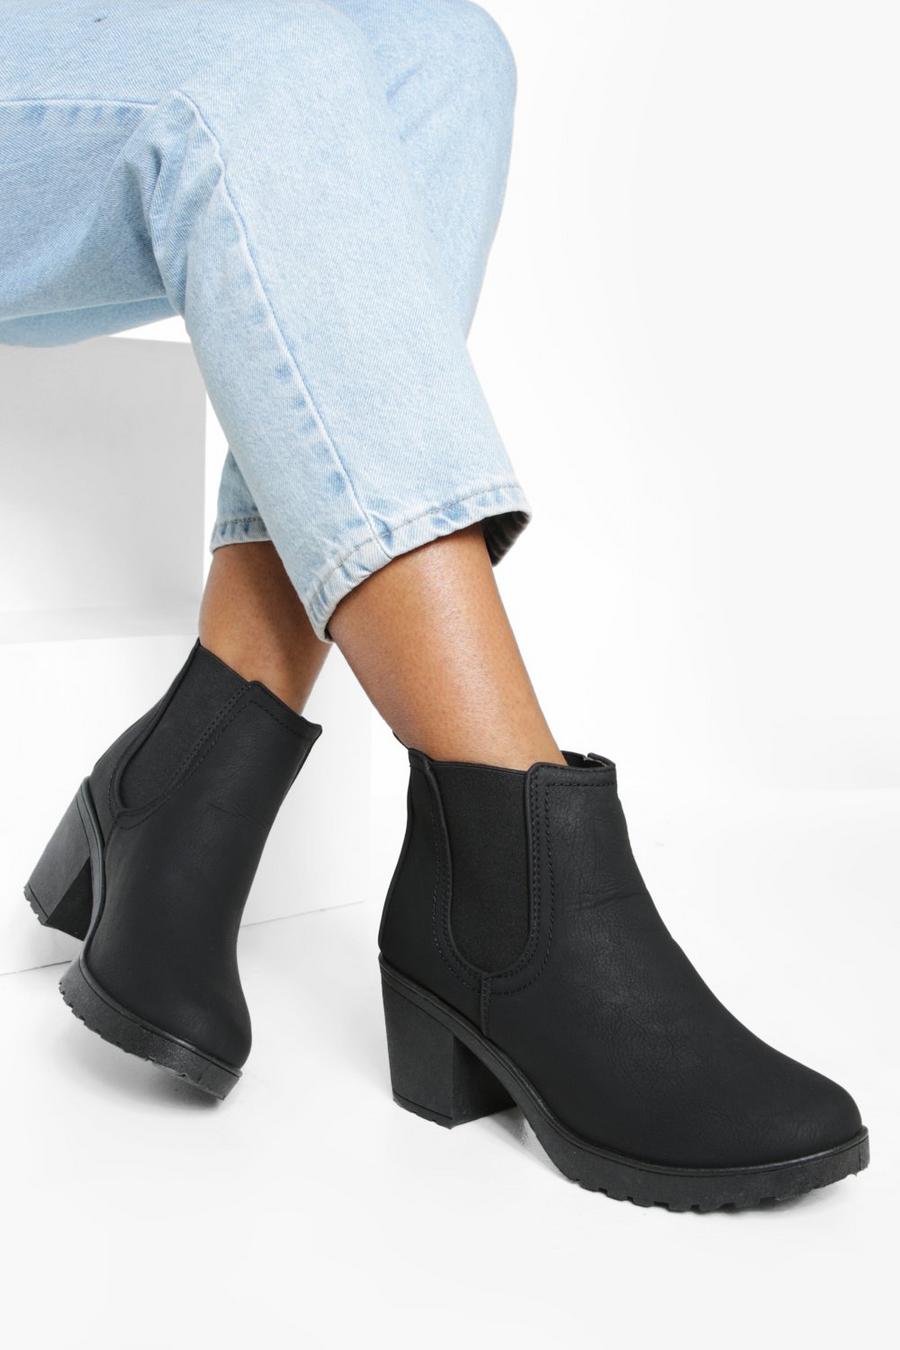 Black Chunky Cleated Heel Chelsea Boots